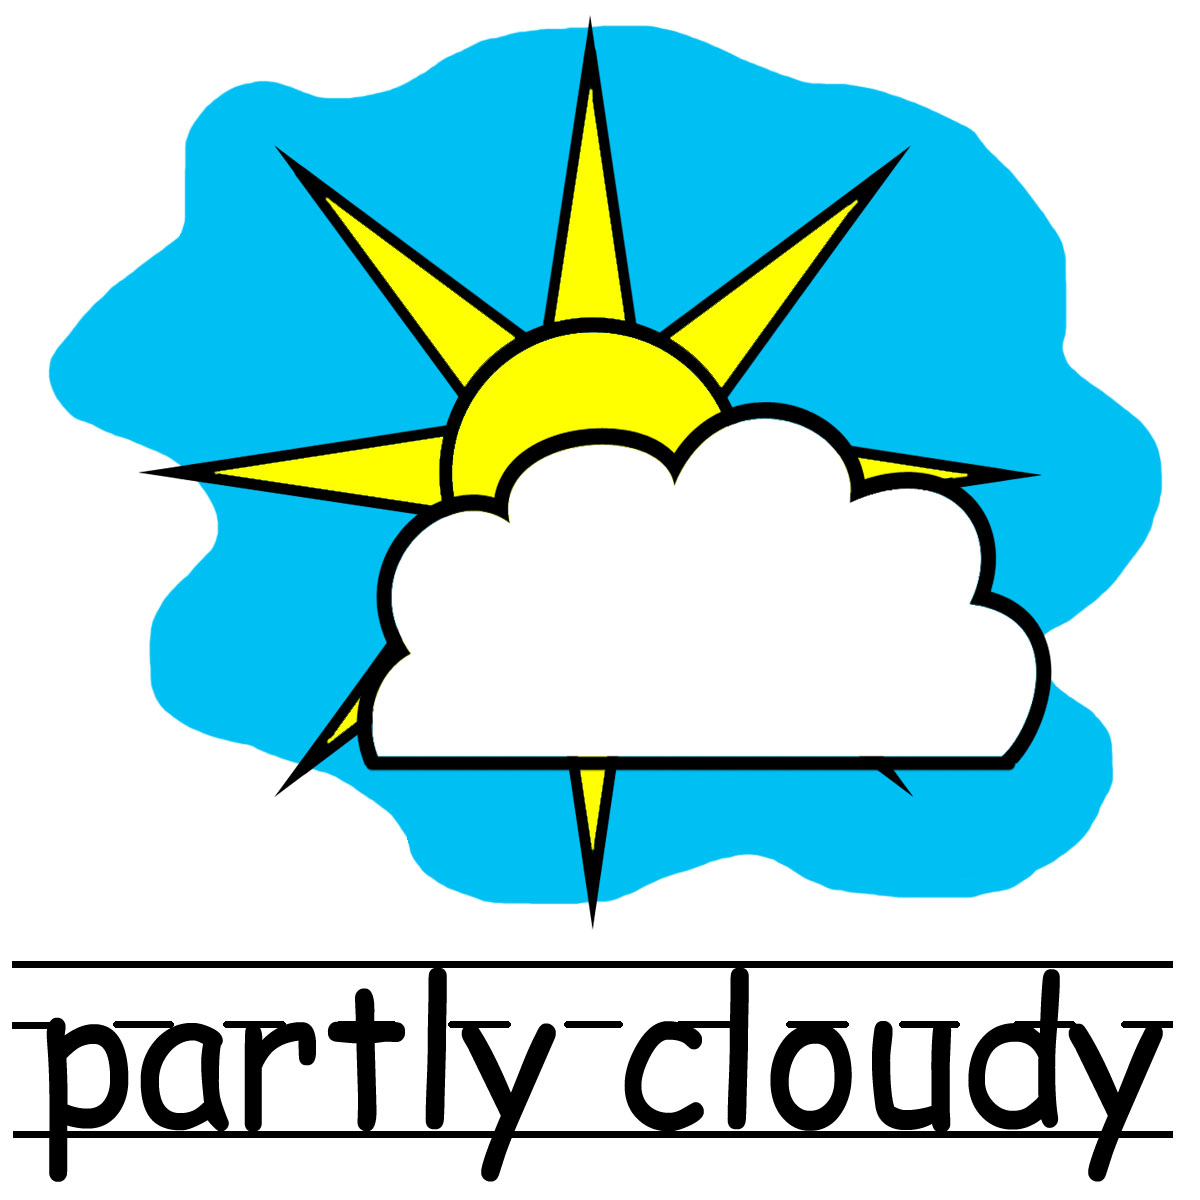 Partly Sunny Clipart